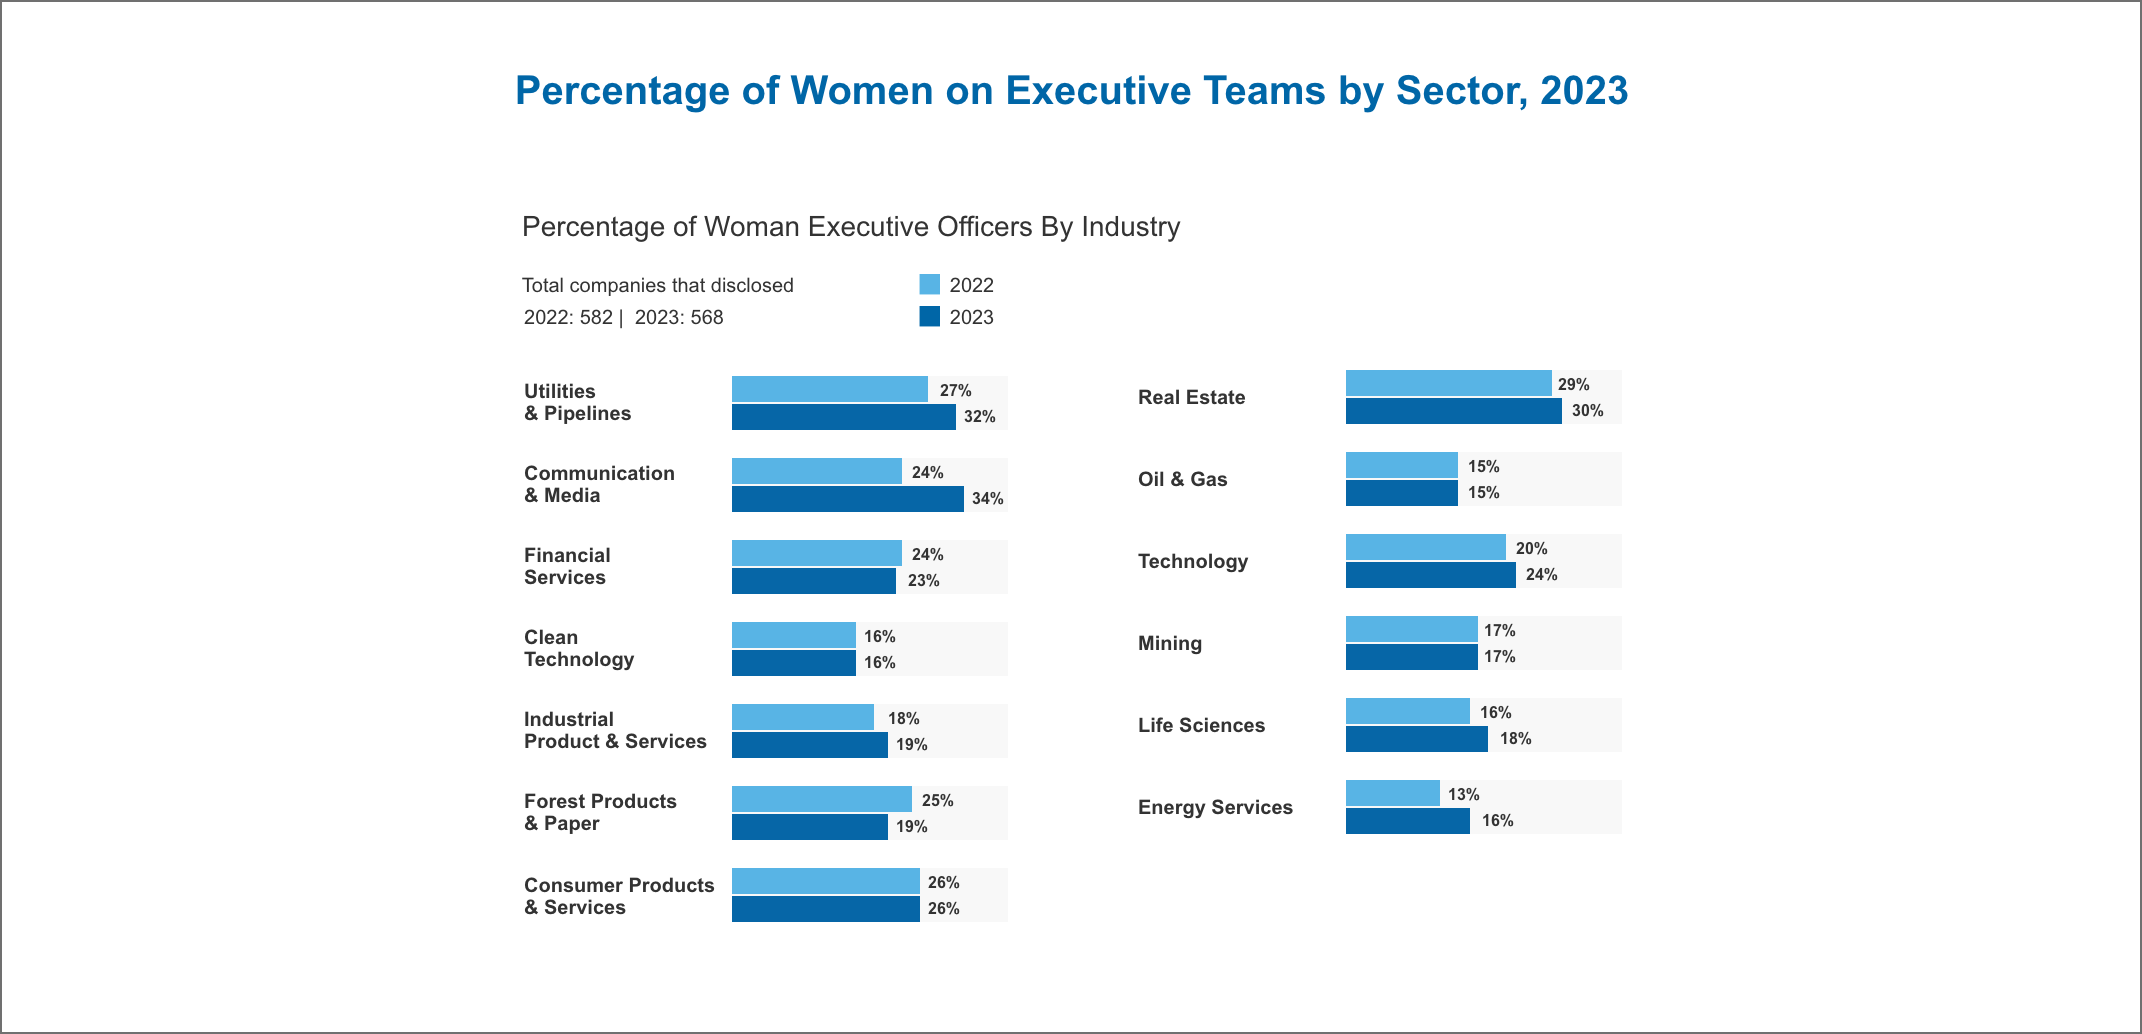 Percentage of Women on Executive Teams by Sector, H1 2023 Snapshot